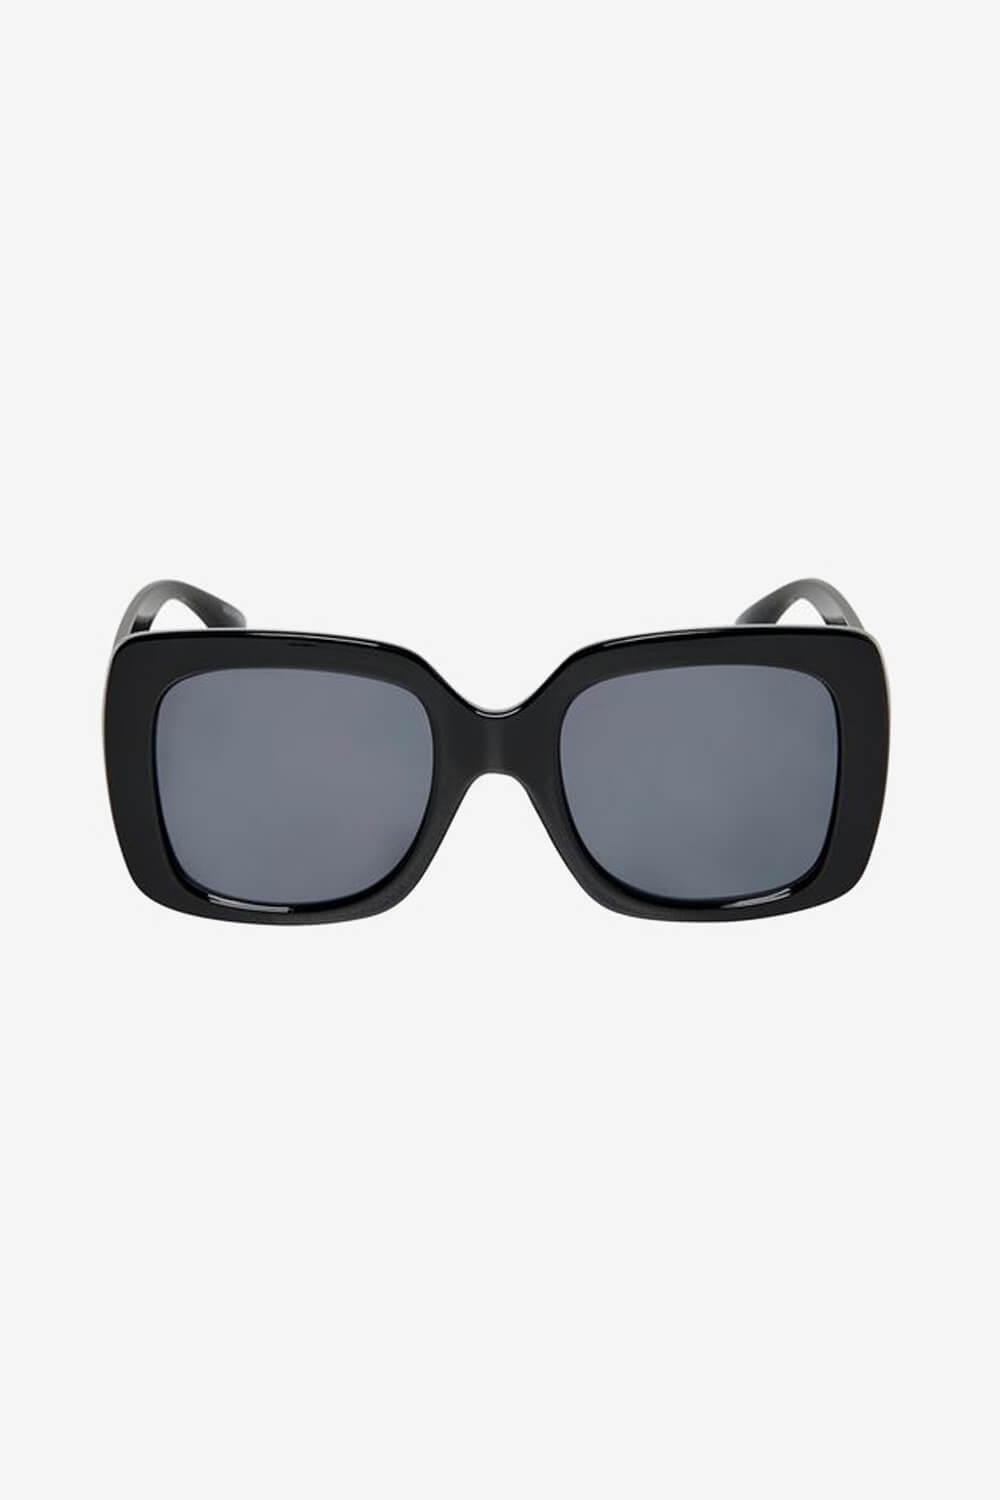 Only Squared Sunglasses in Black | iCLOTHING